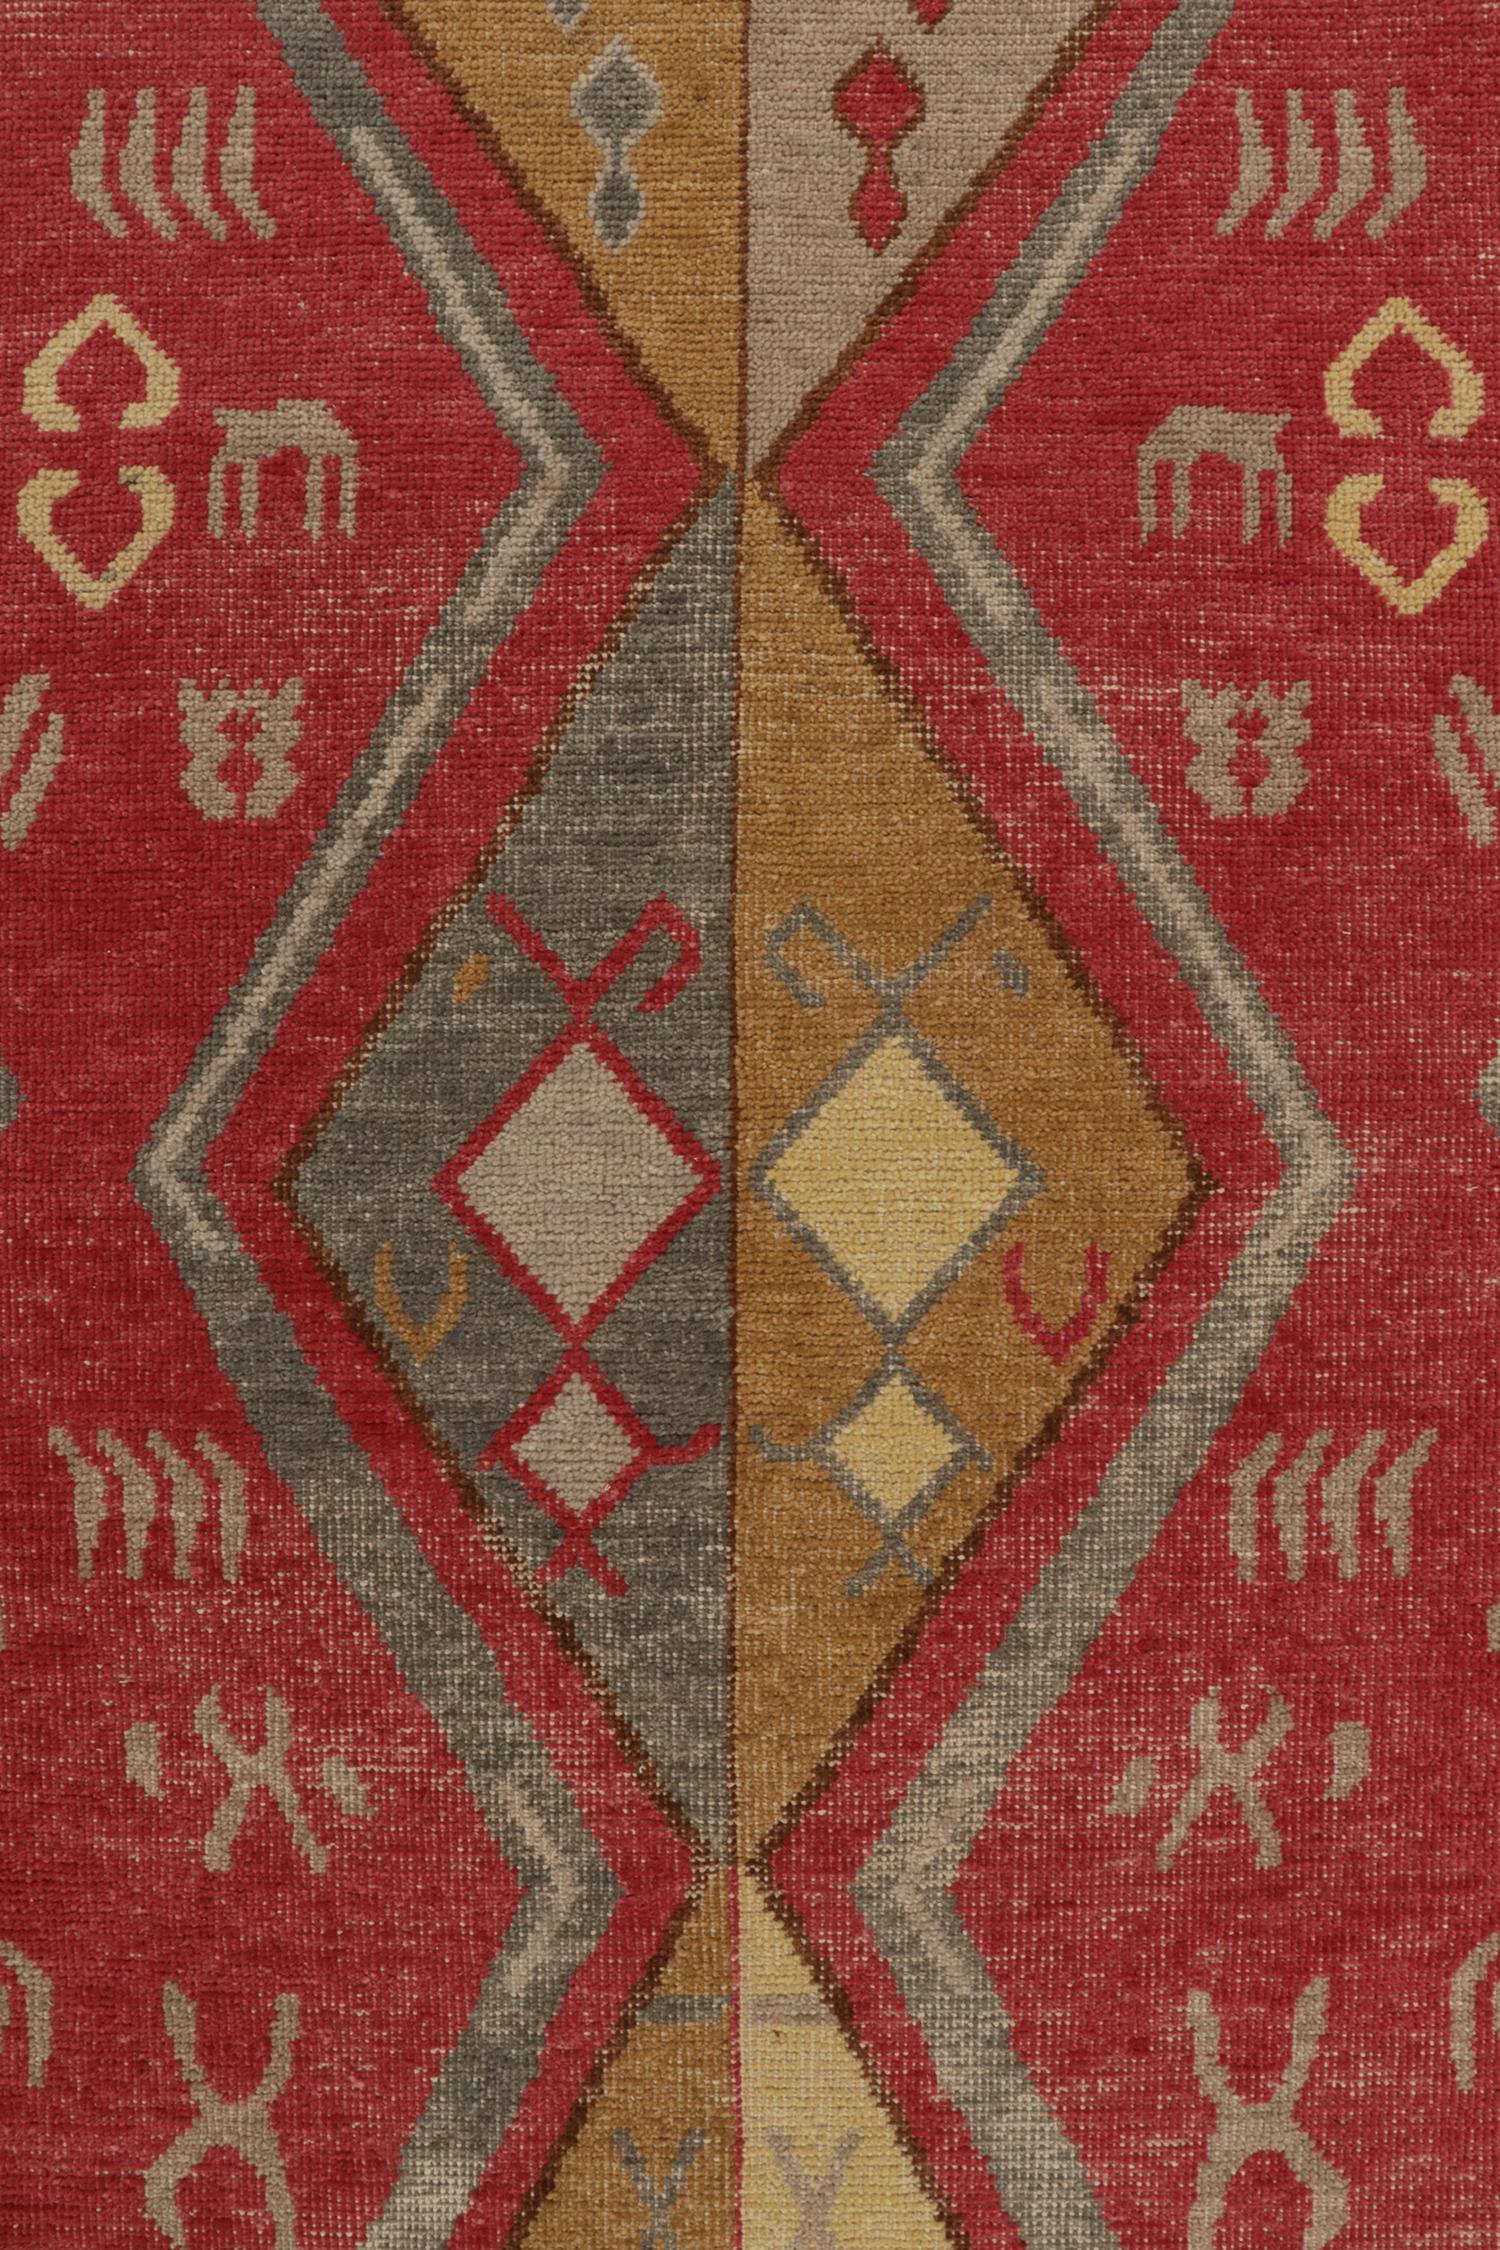 Hand-Knotted Rug & Kilim’s Distressed Yuruk Style Rug in Red, Beige & Gray Geometric Patterns For Sale